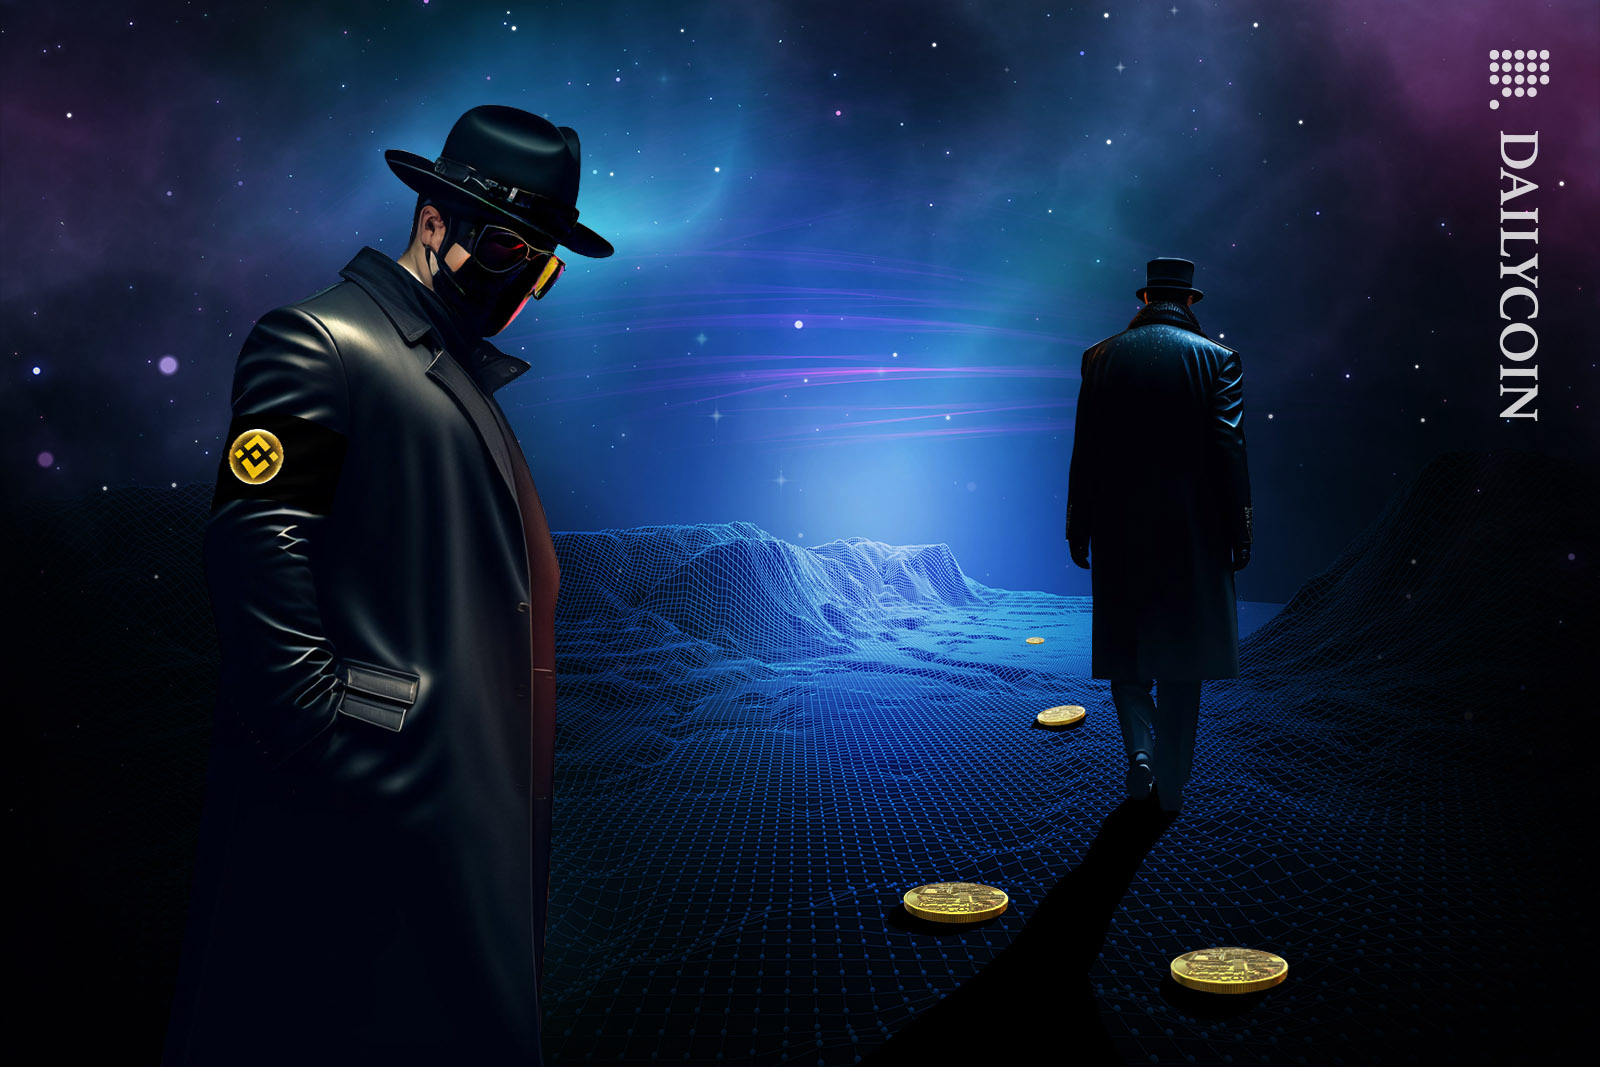 Two Binance investigators are following trail of crypto coins through a dark night.